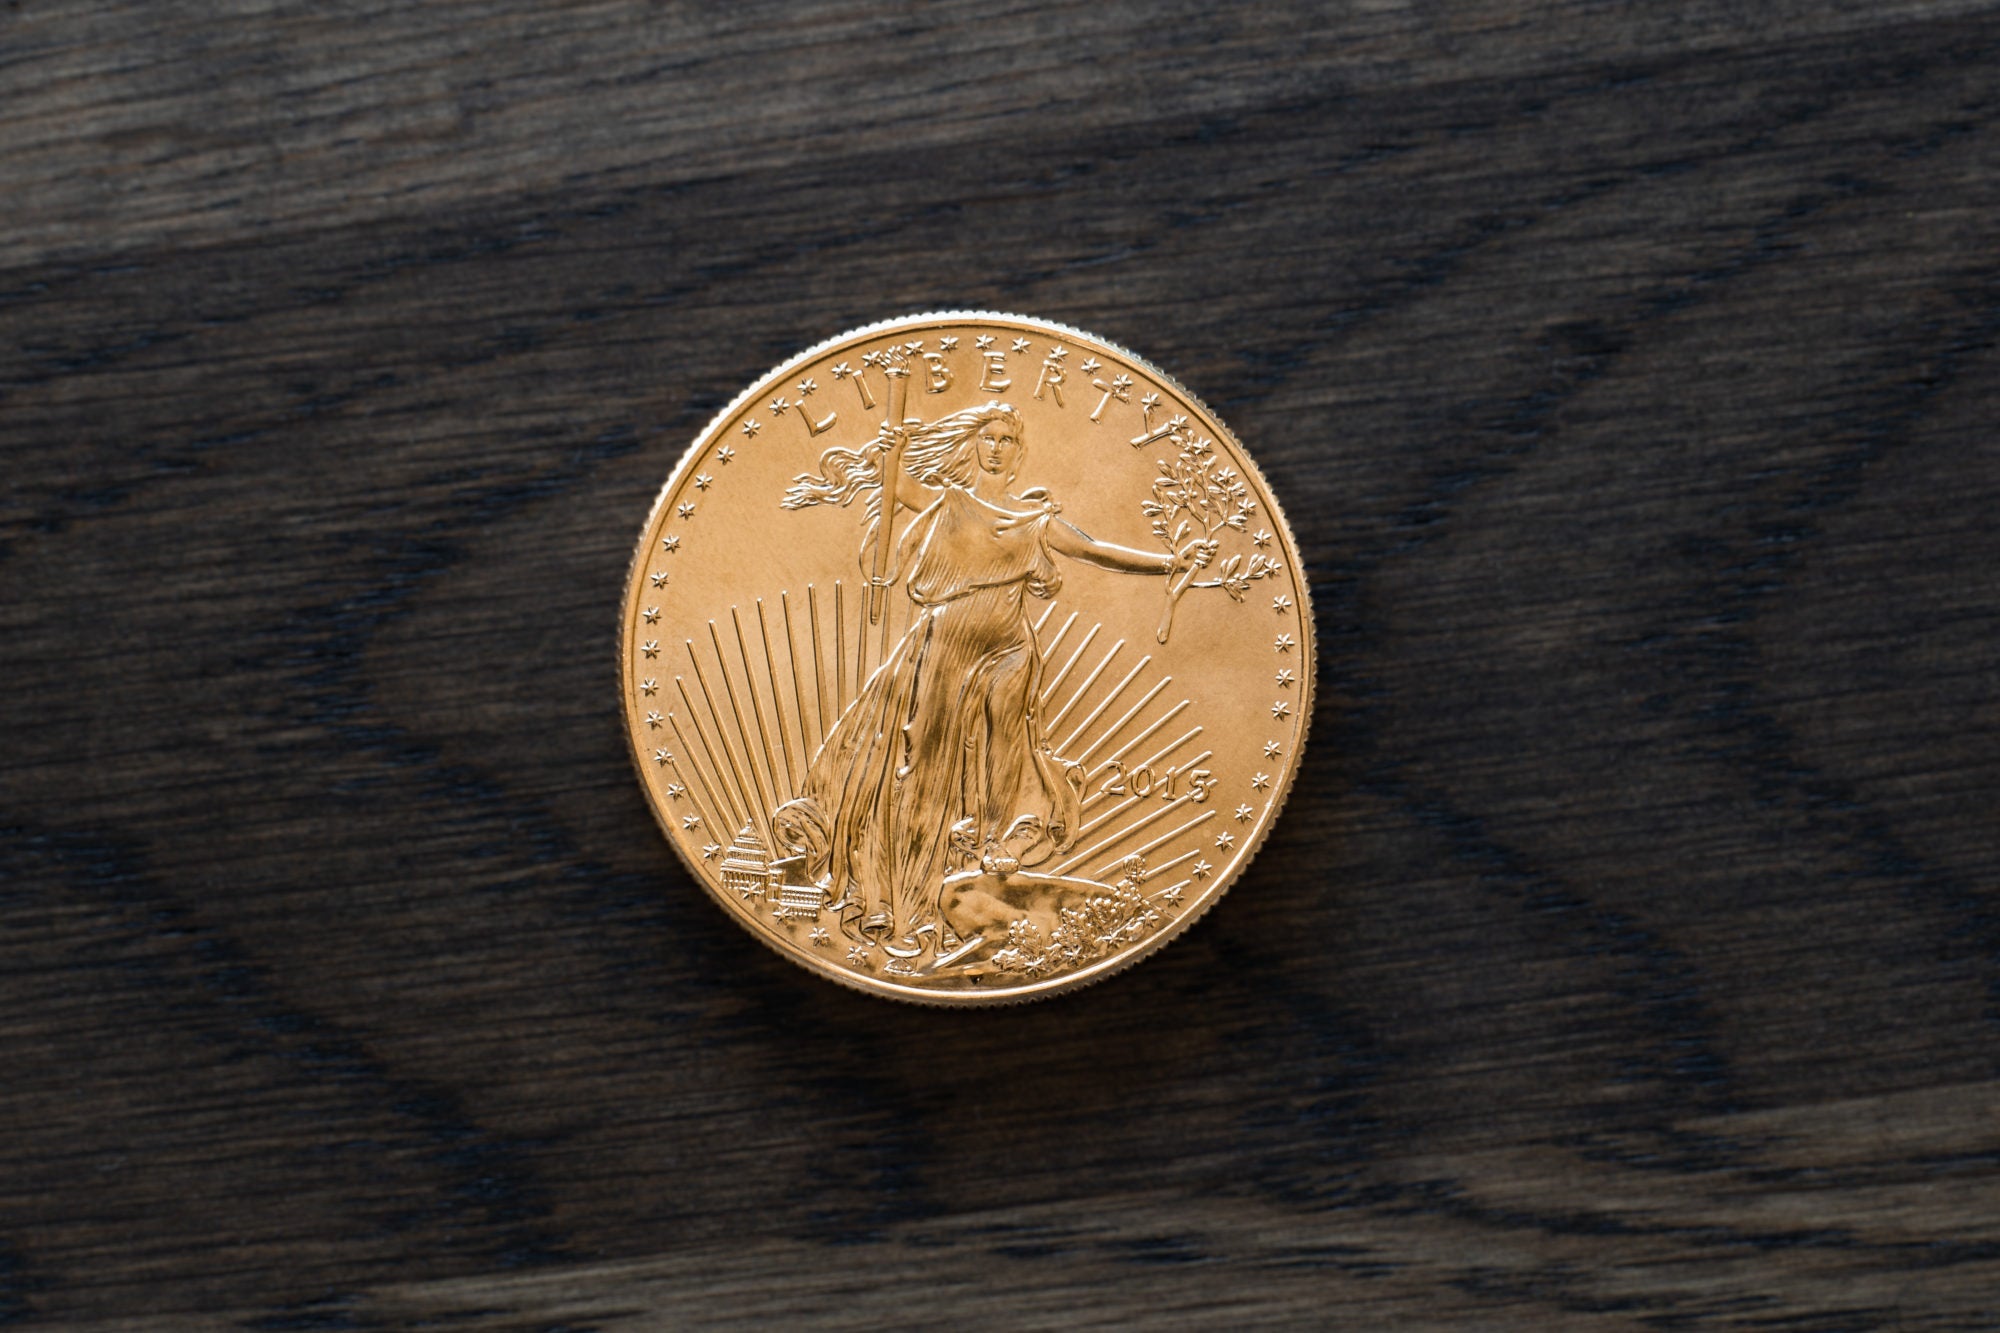 U.S. MINT REDUCING PRODUCTION OF AMERICAN GOLD EAGLE BULLION COINS